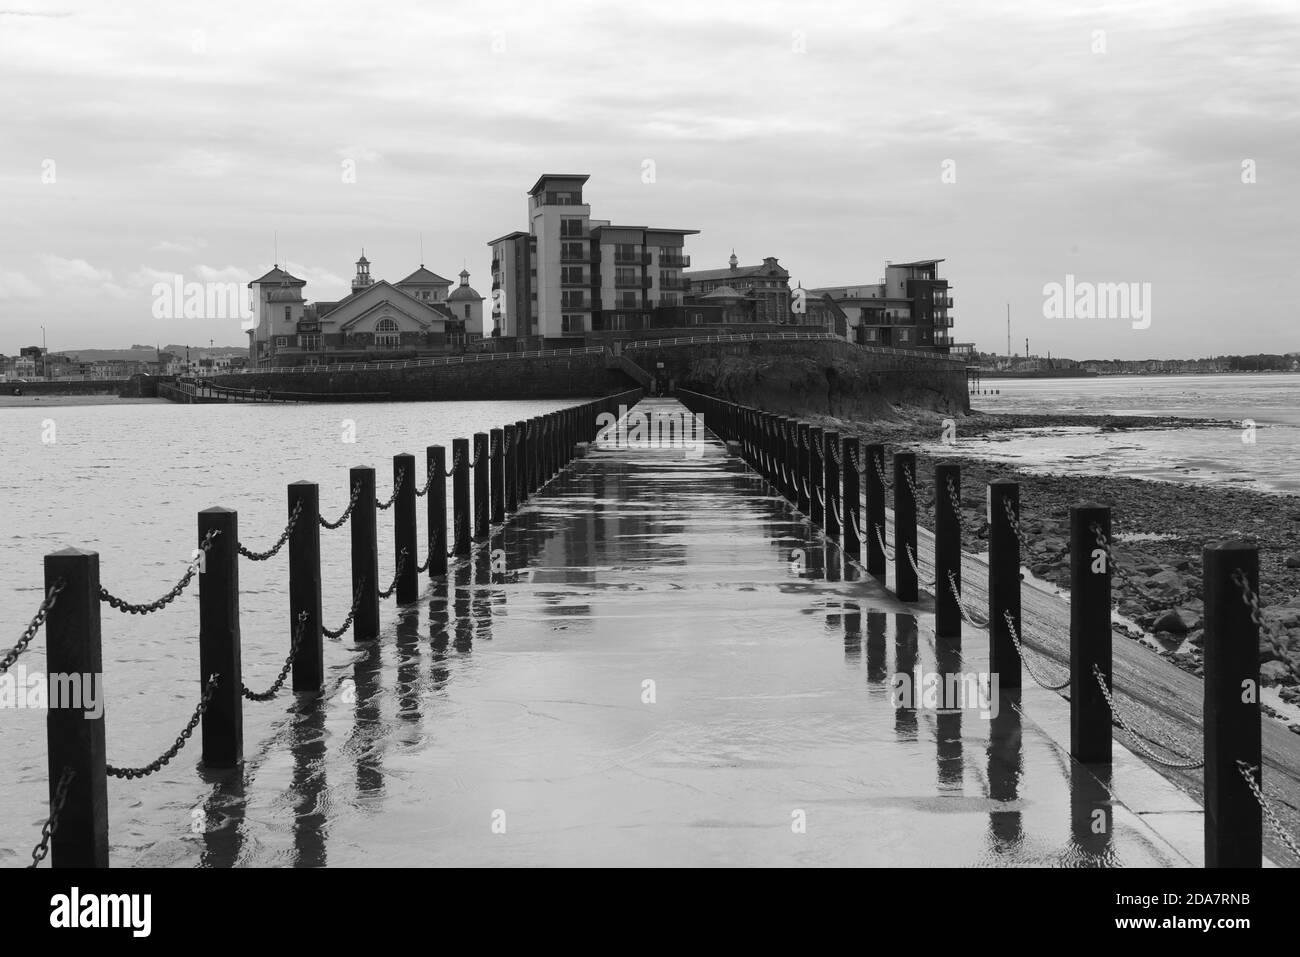 A walkway across the water in this photo taken at the seaside in Weston-super-Mare Stock Photo